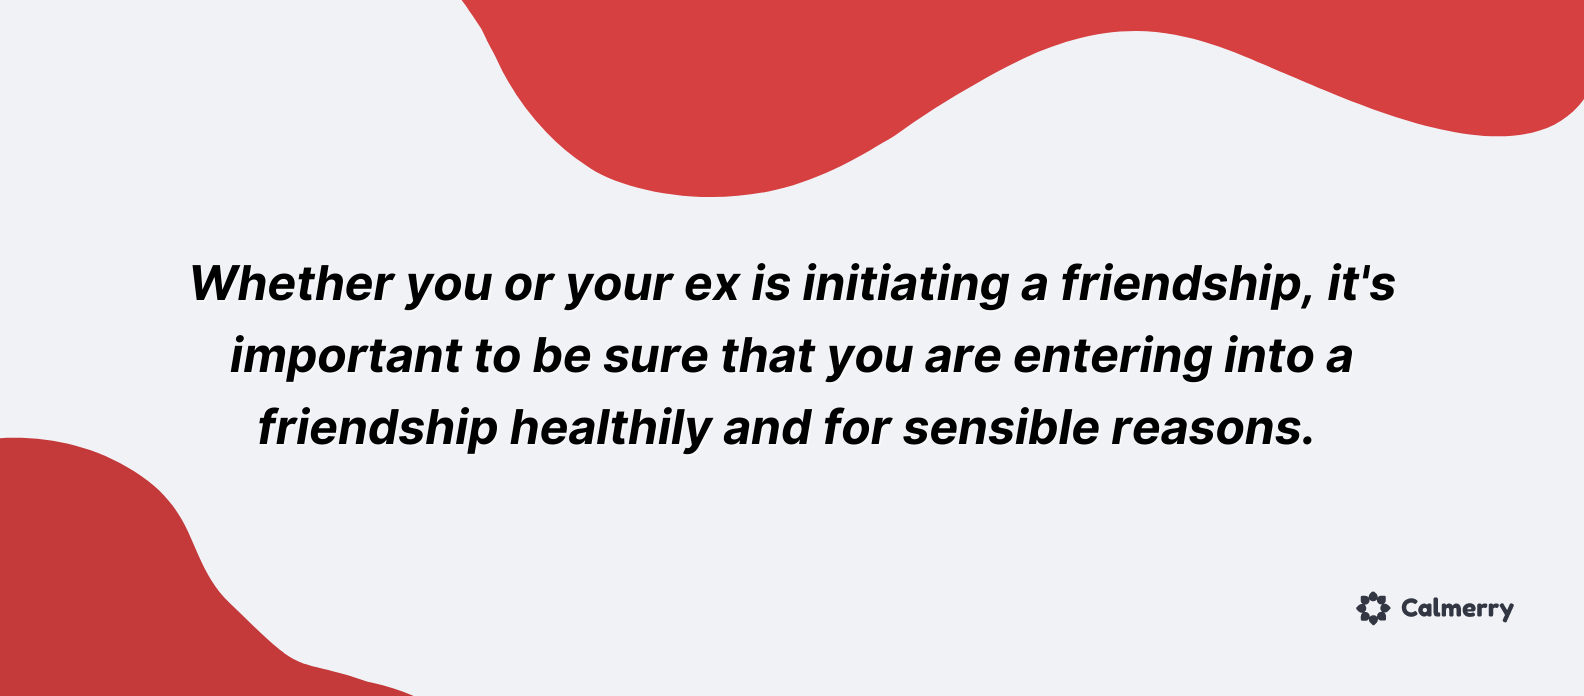 Whether you or your ex is initiating a friendship